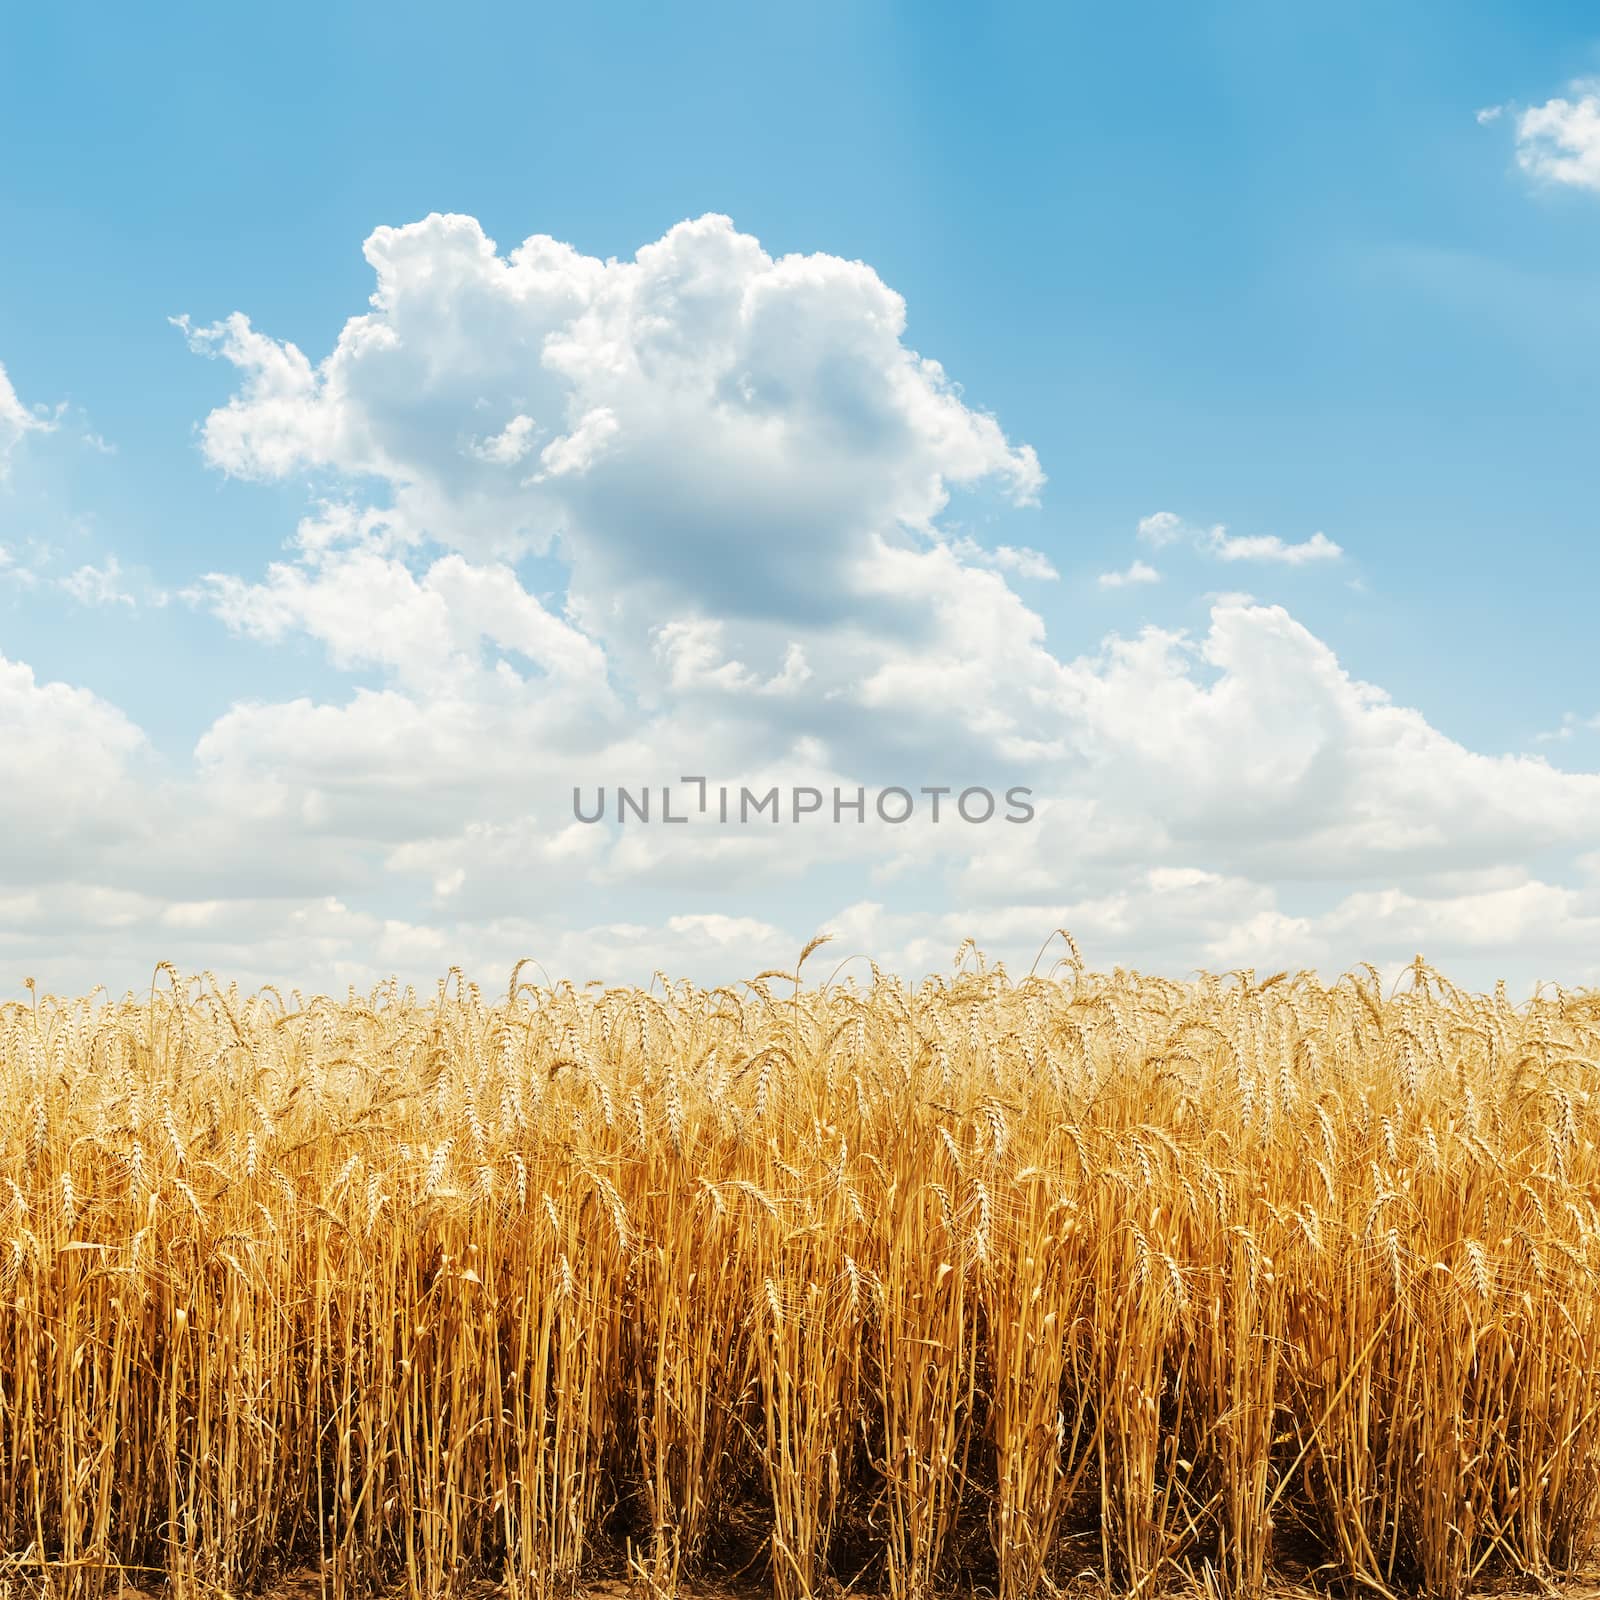 golden harvest field and cloudy sky